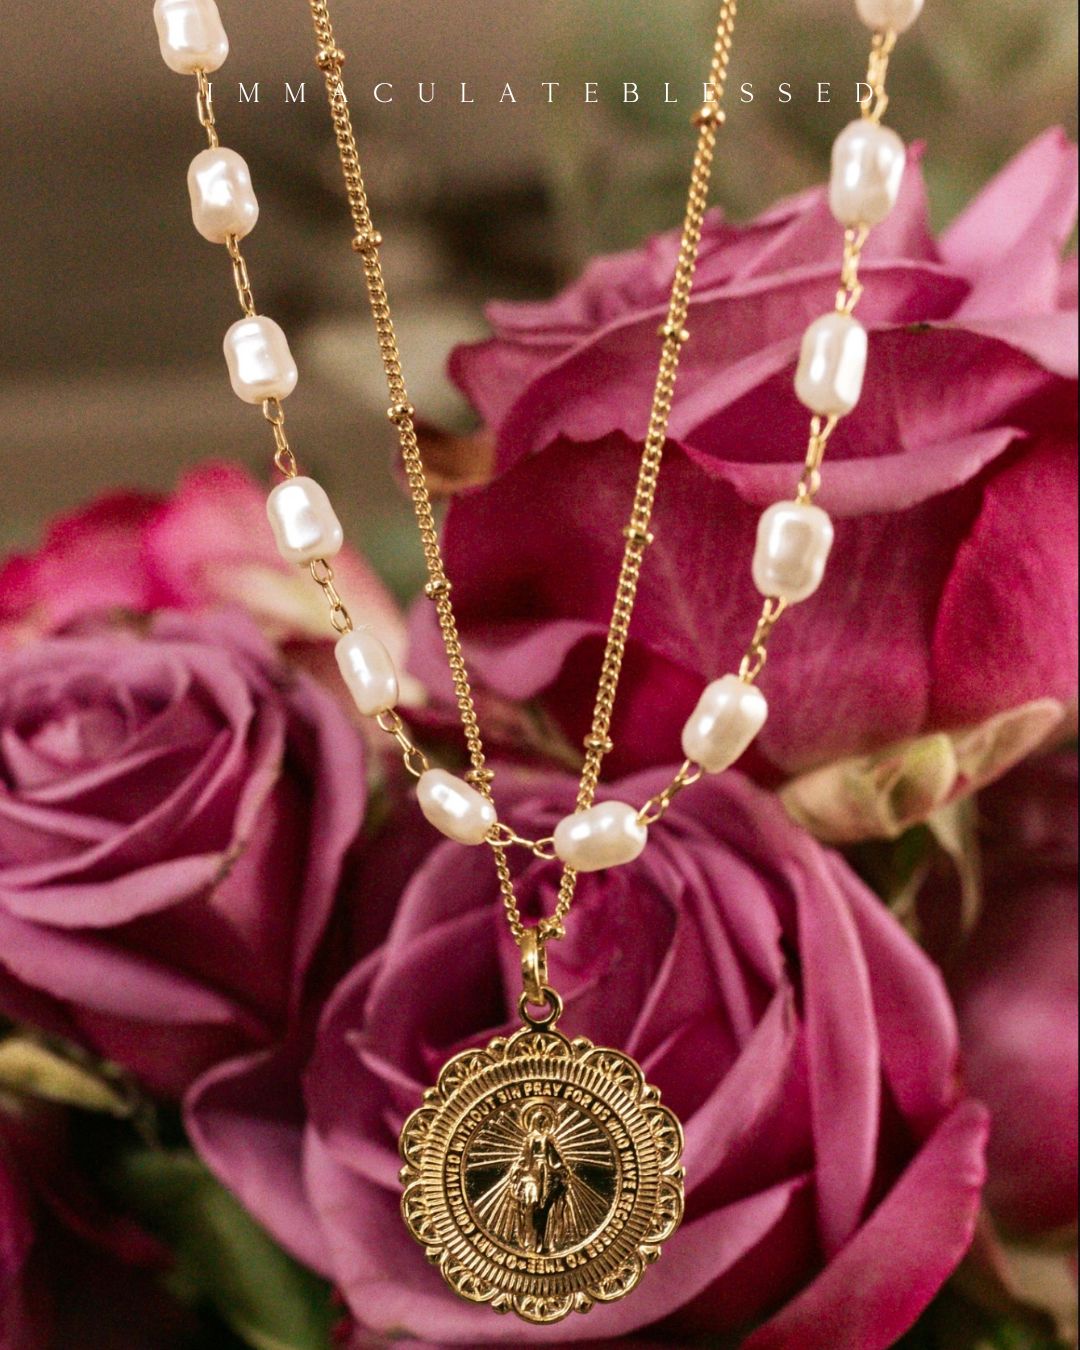 Miraculous Medal Antique Gold Filled Satellite Chain Necklace